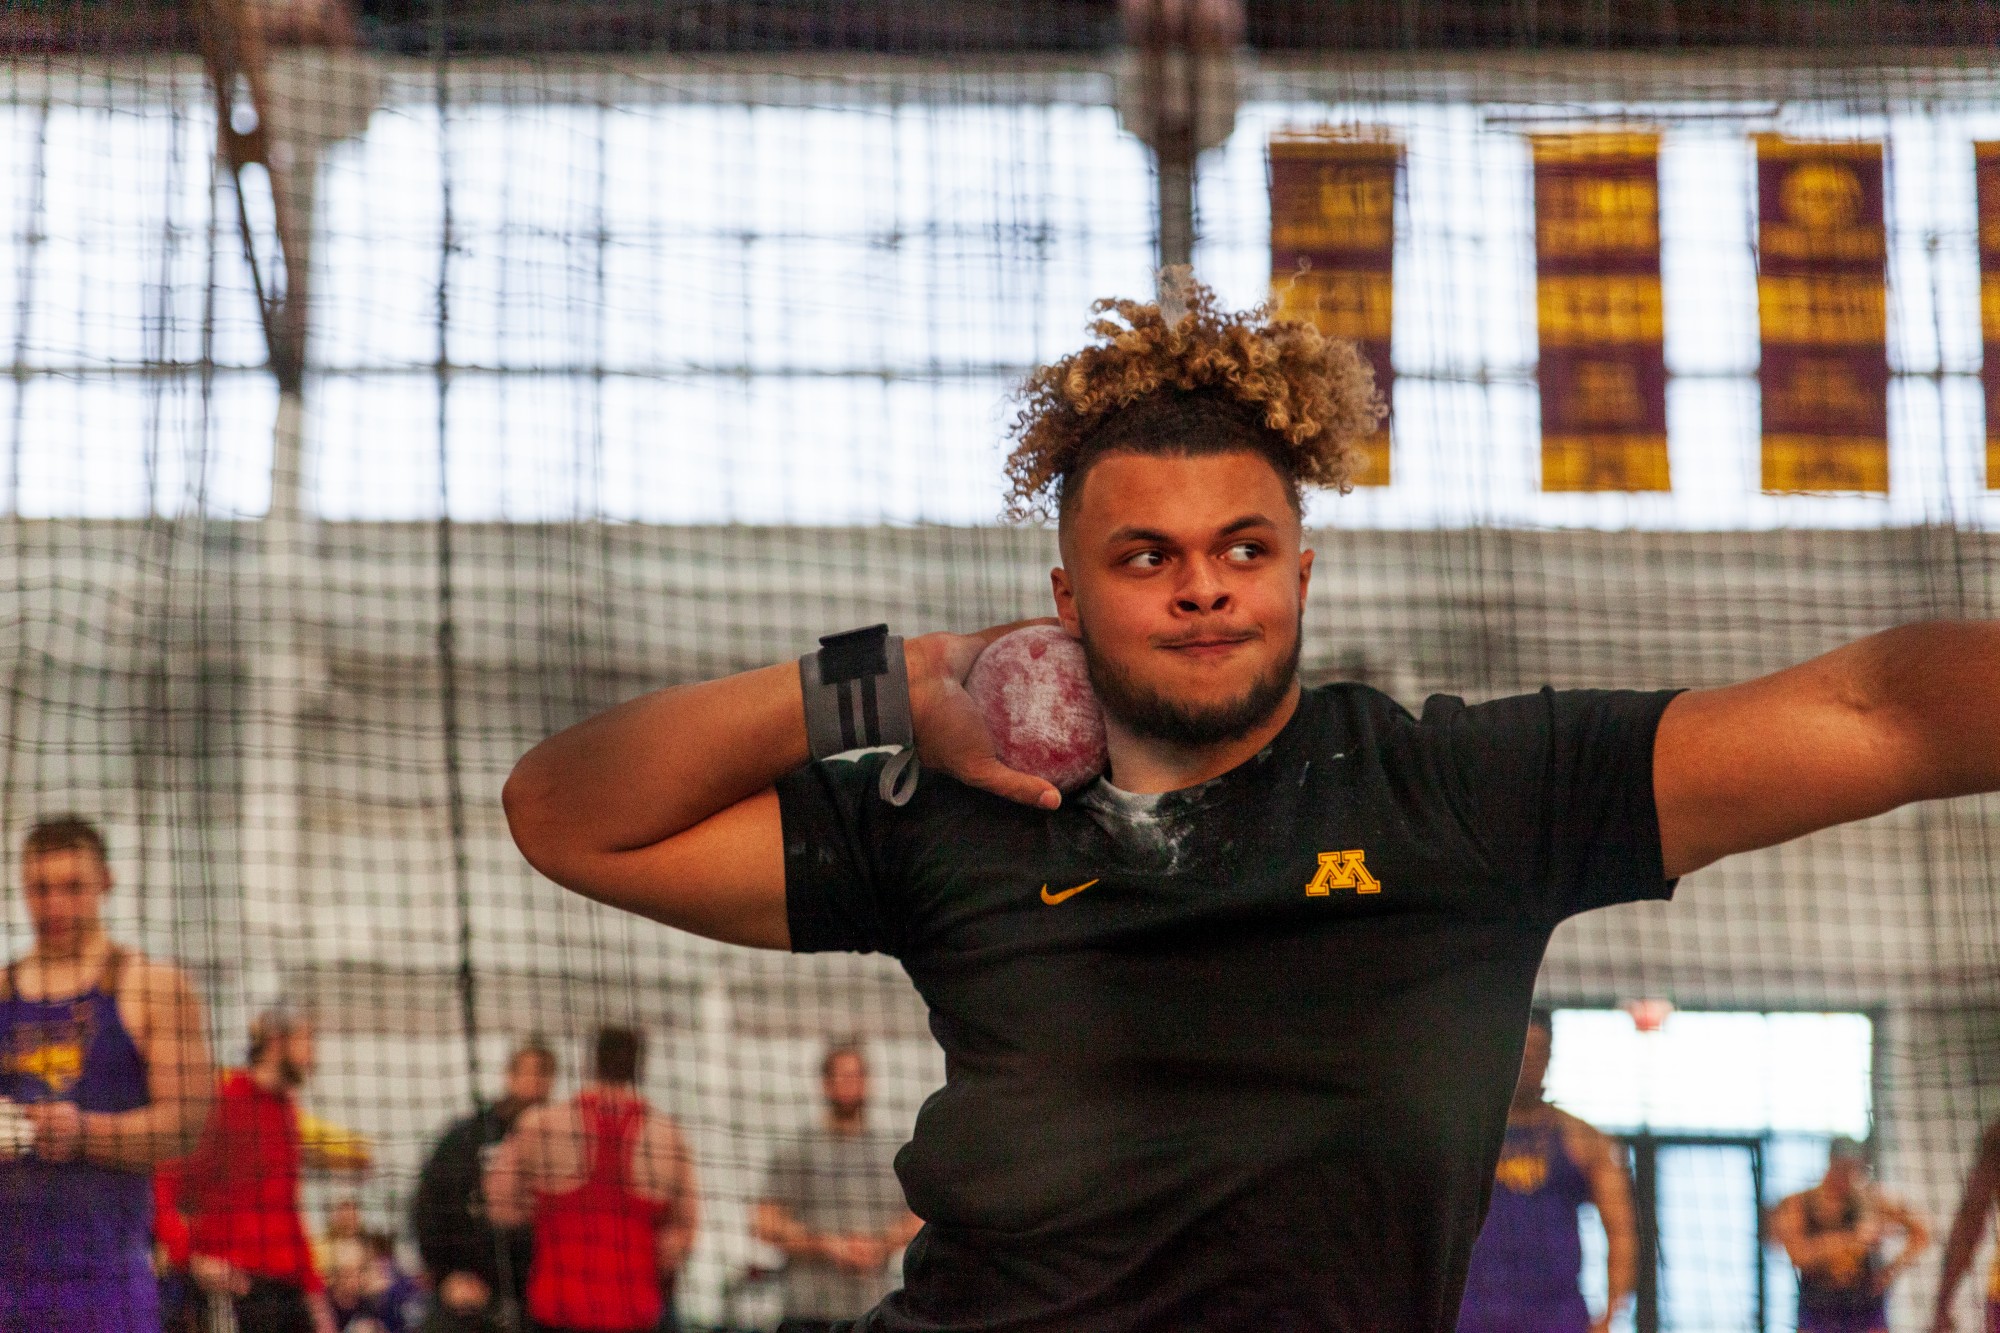 Gophers Freshman Kyle Atkinson competes unattached in the shot put at the Minnesota Cold Classic at the University of Minnesota Fieldhouse on Friday, Feb. 21.